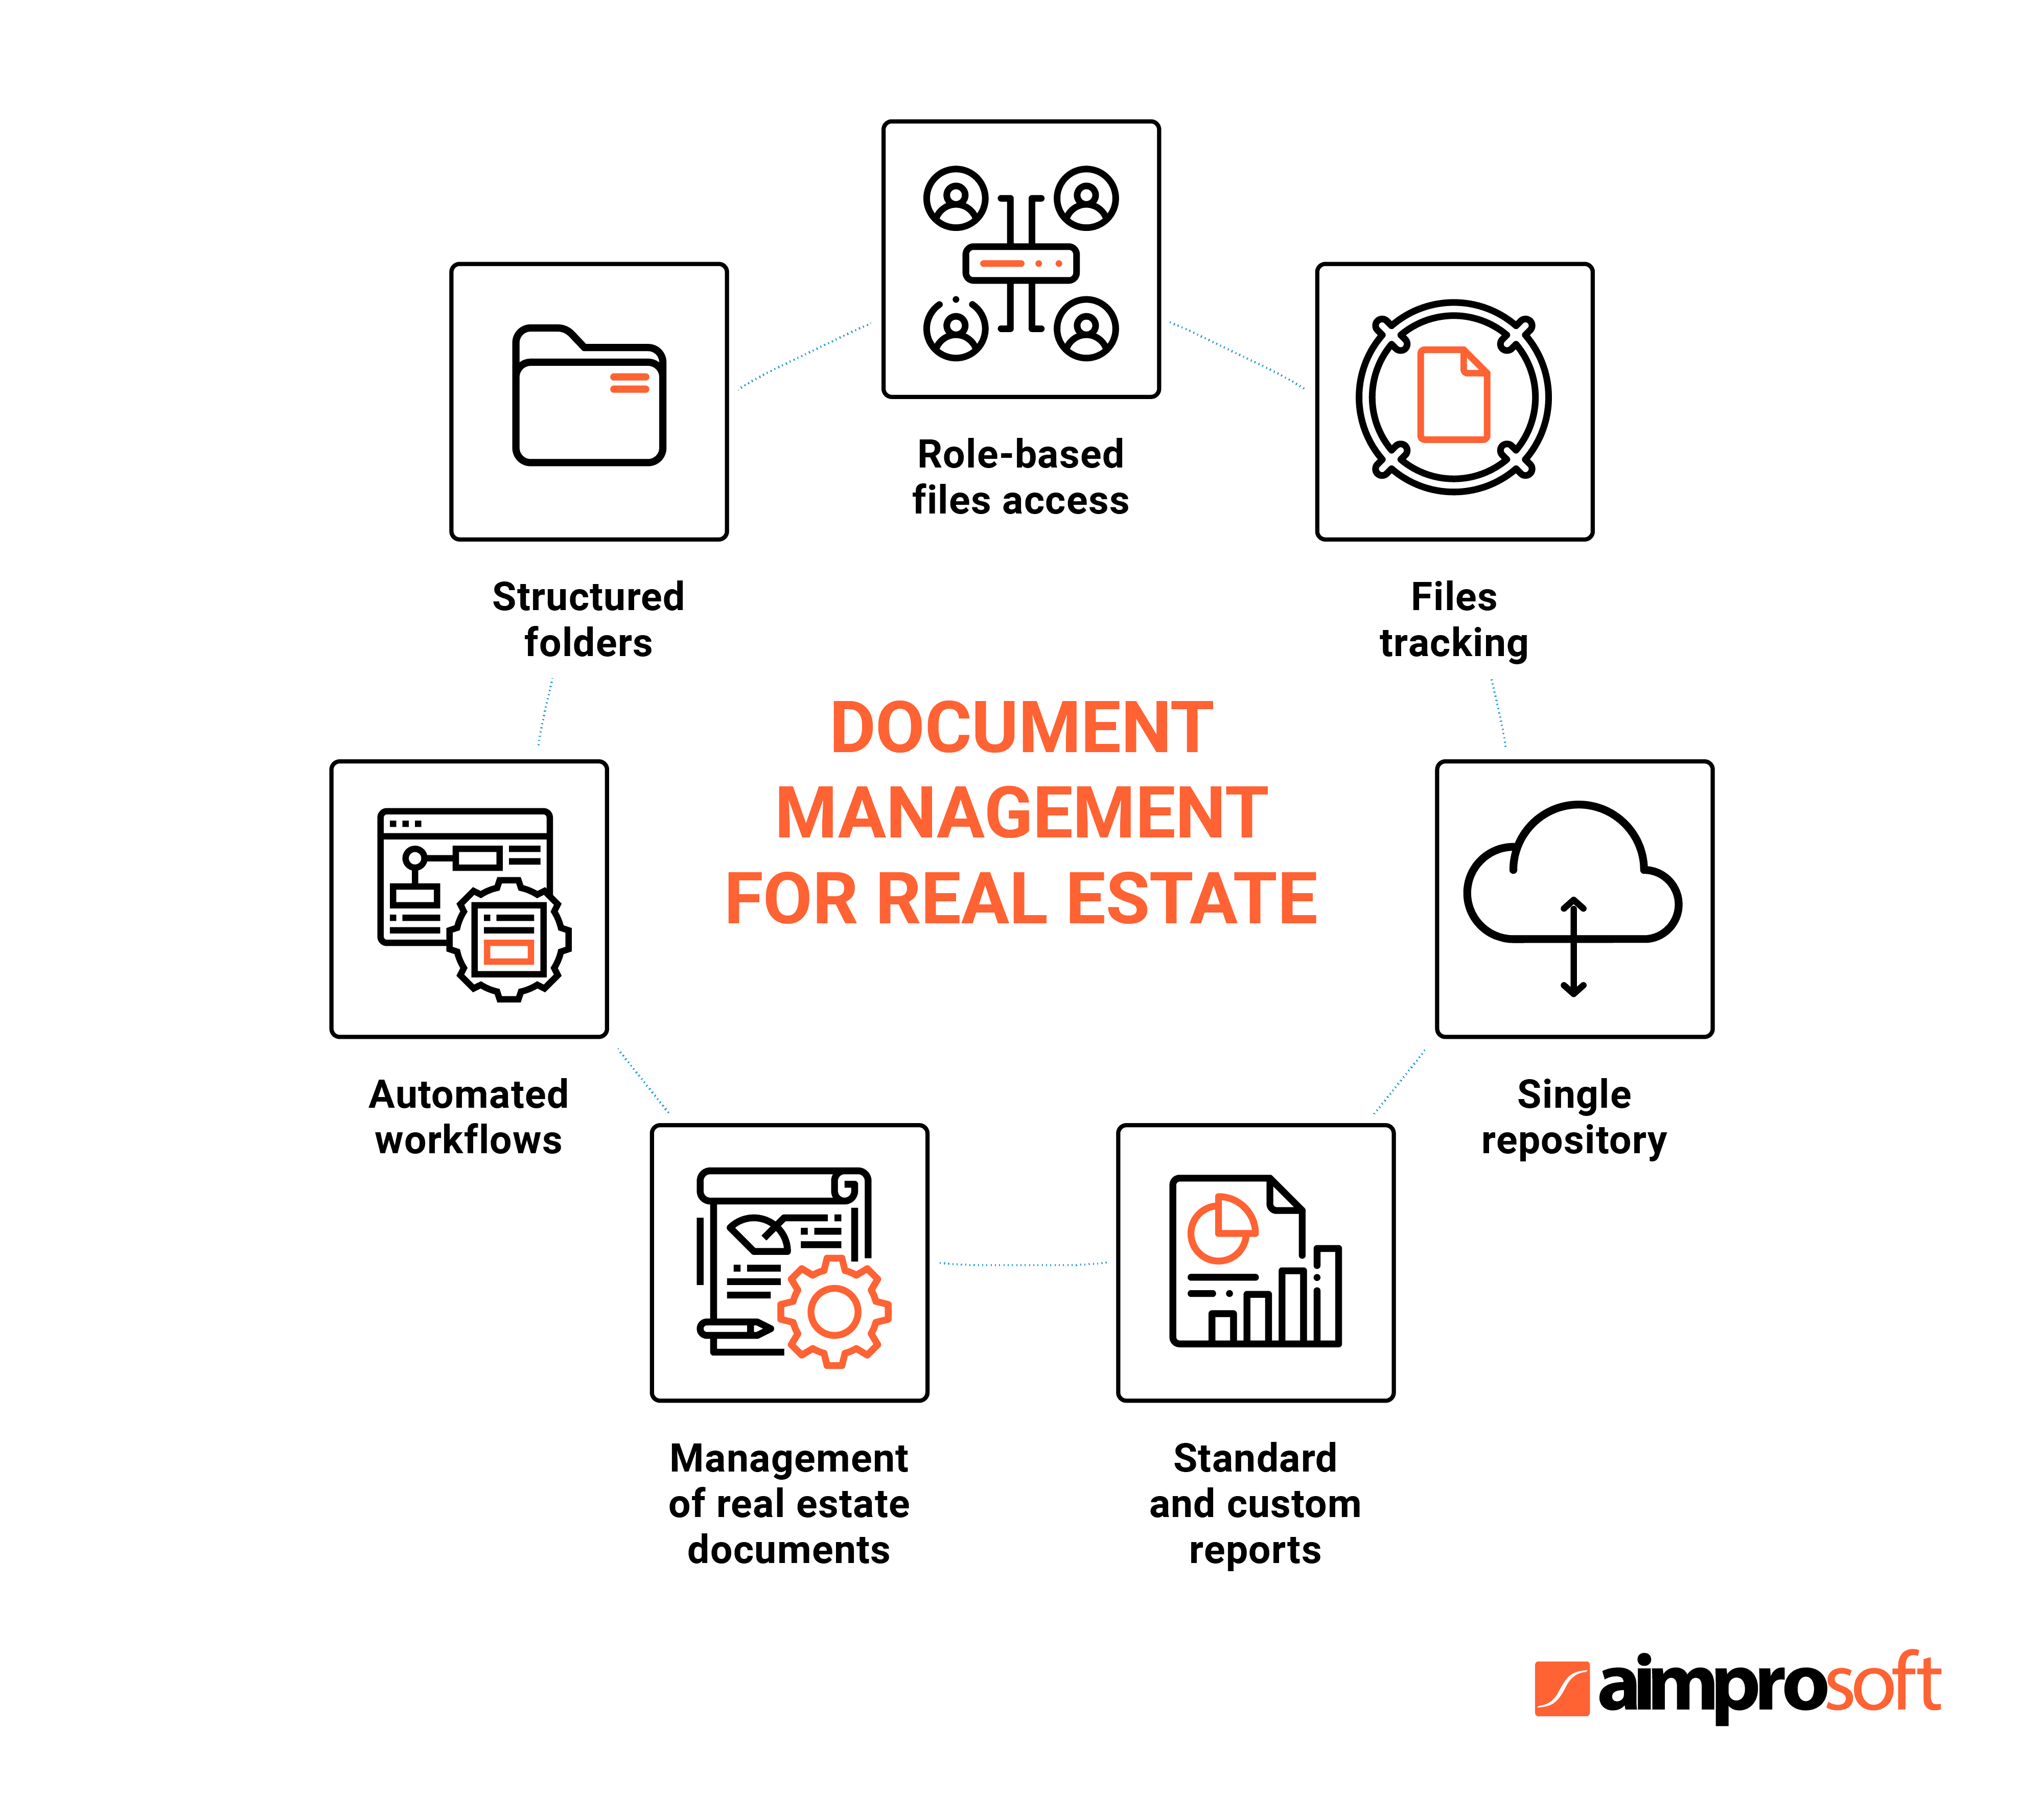 Example of document storage in real estate management software